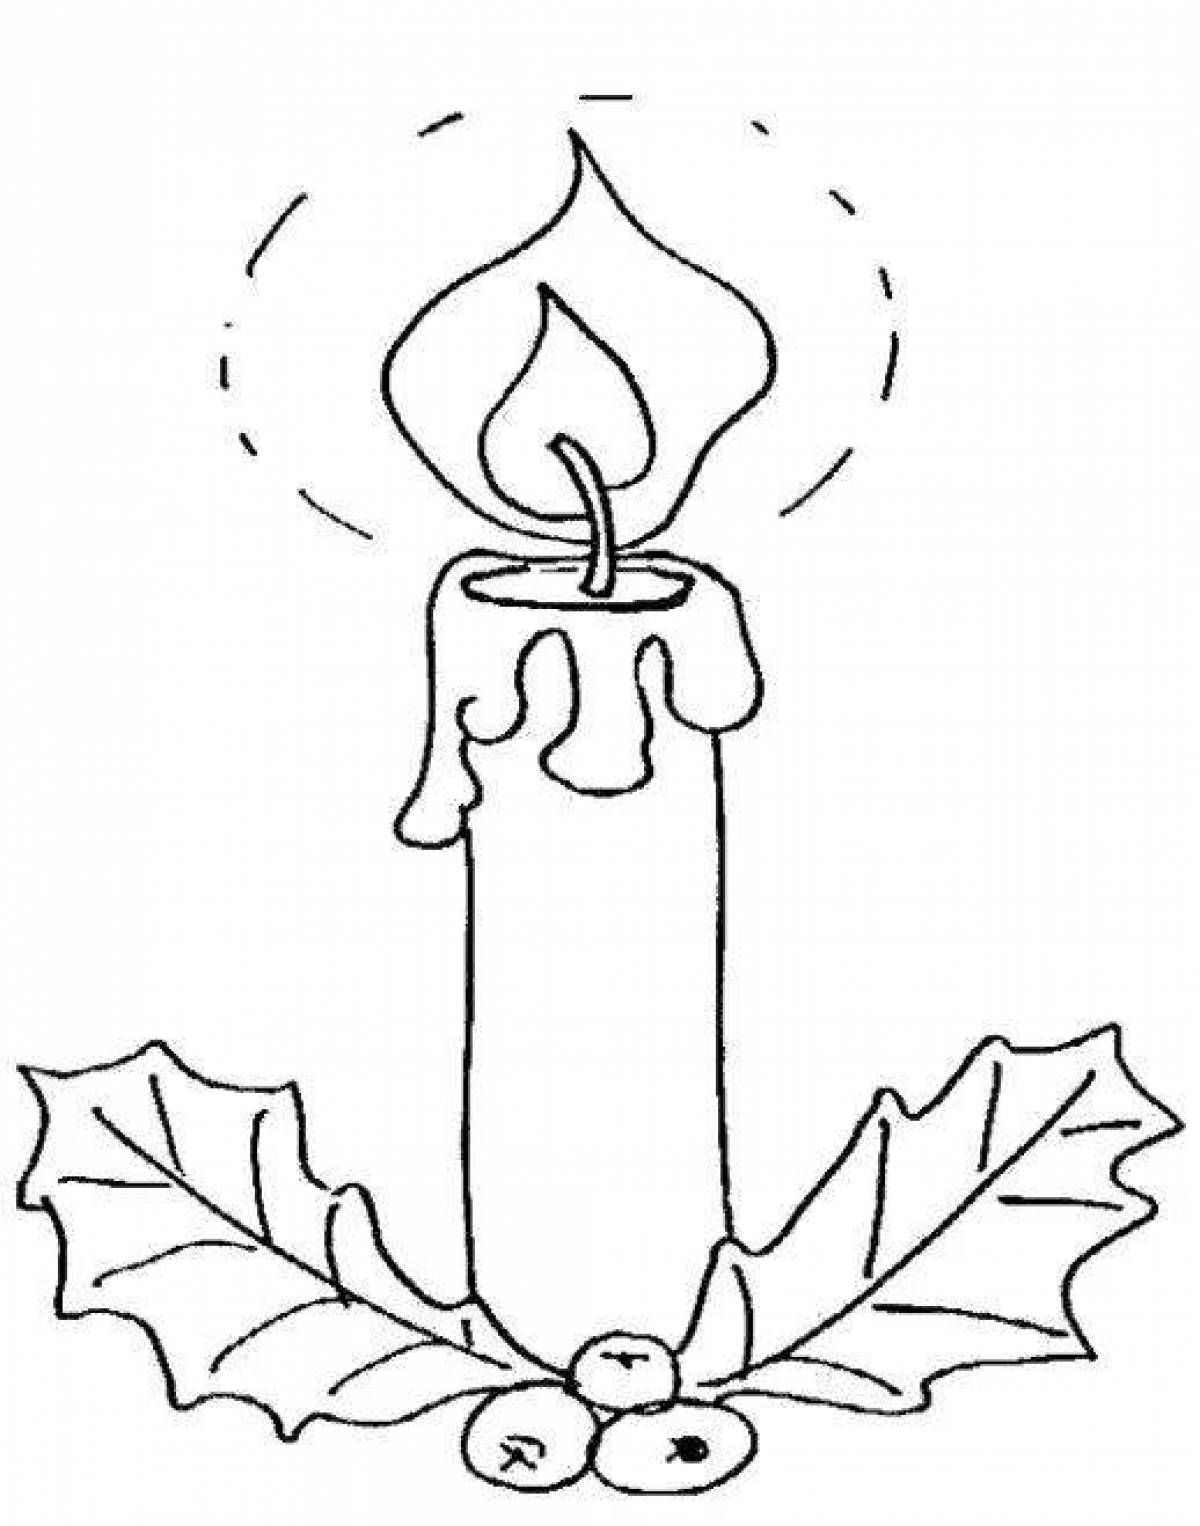 Large Christmas candle coloring page